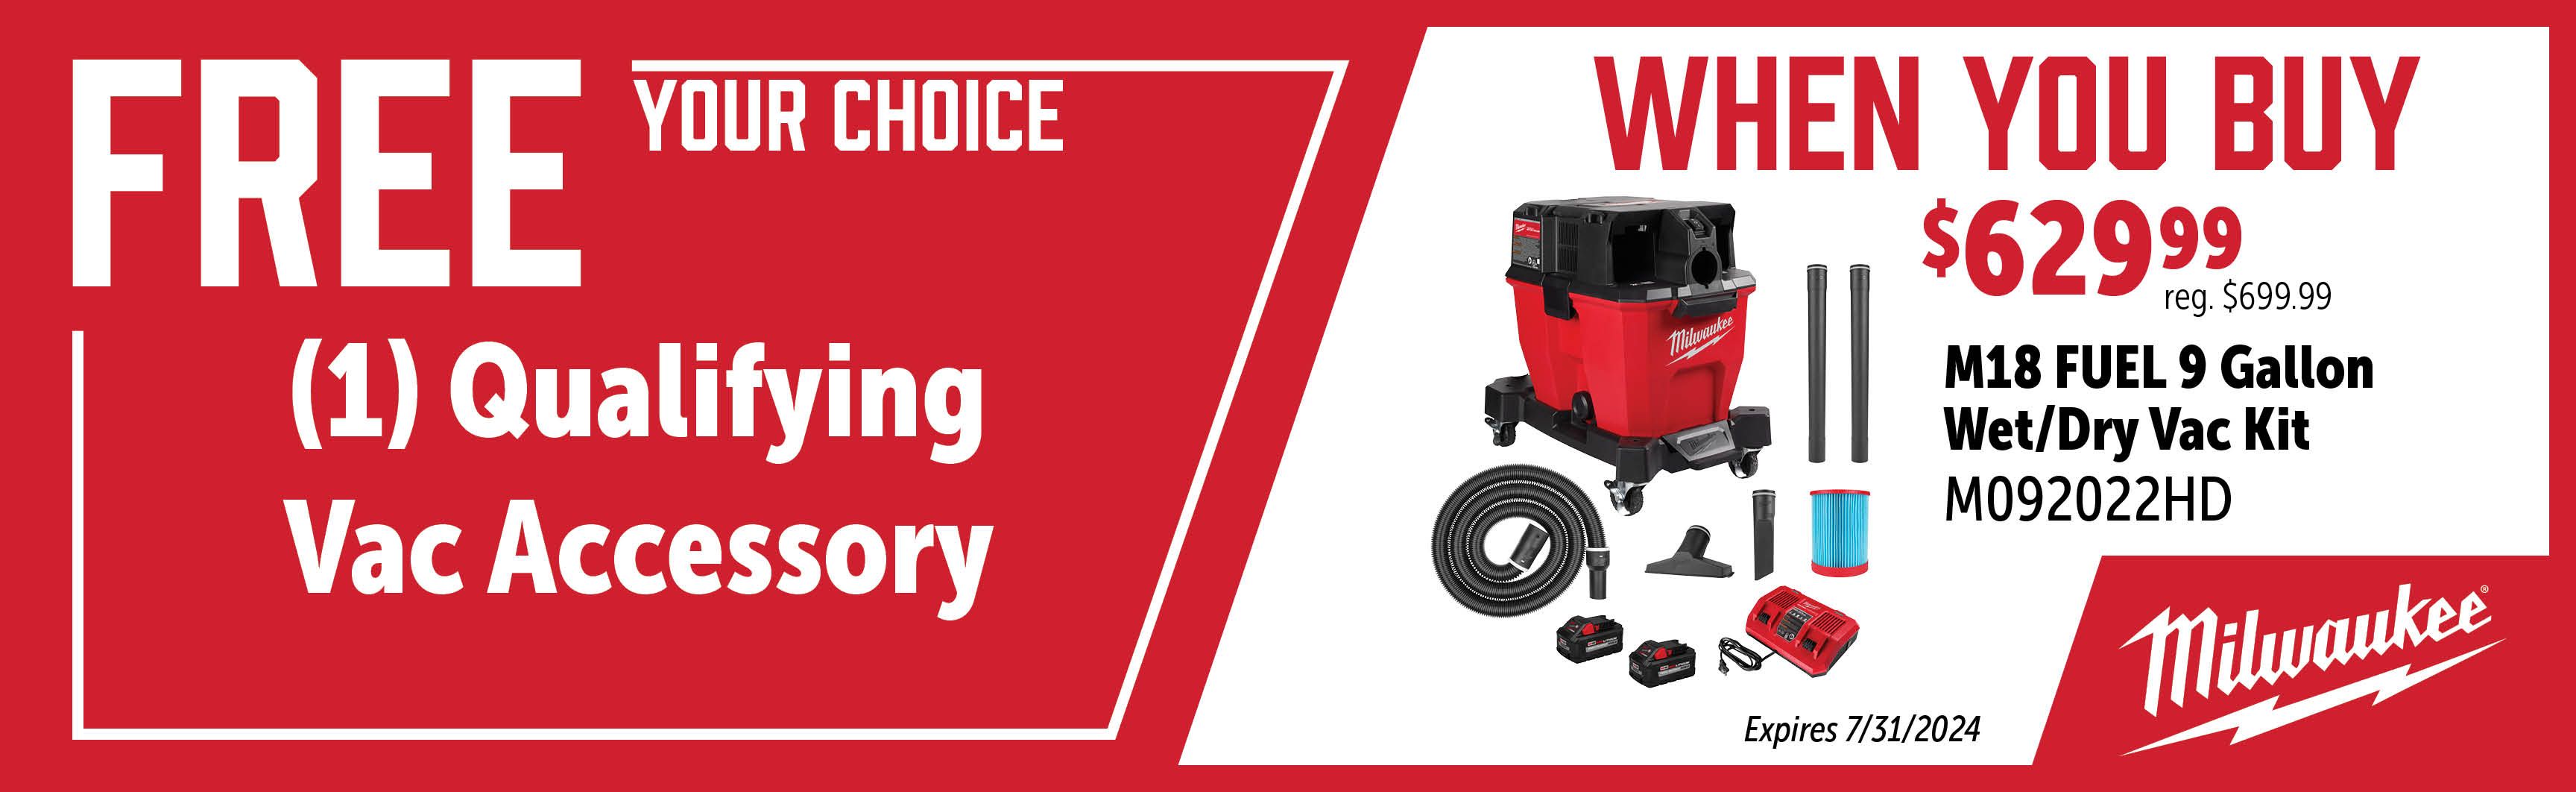 Milwaukee May - July: Buy a M092022HD and Get a Qualifying Vac Accessory Free